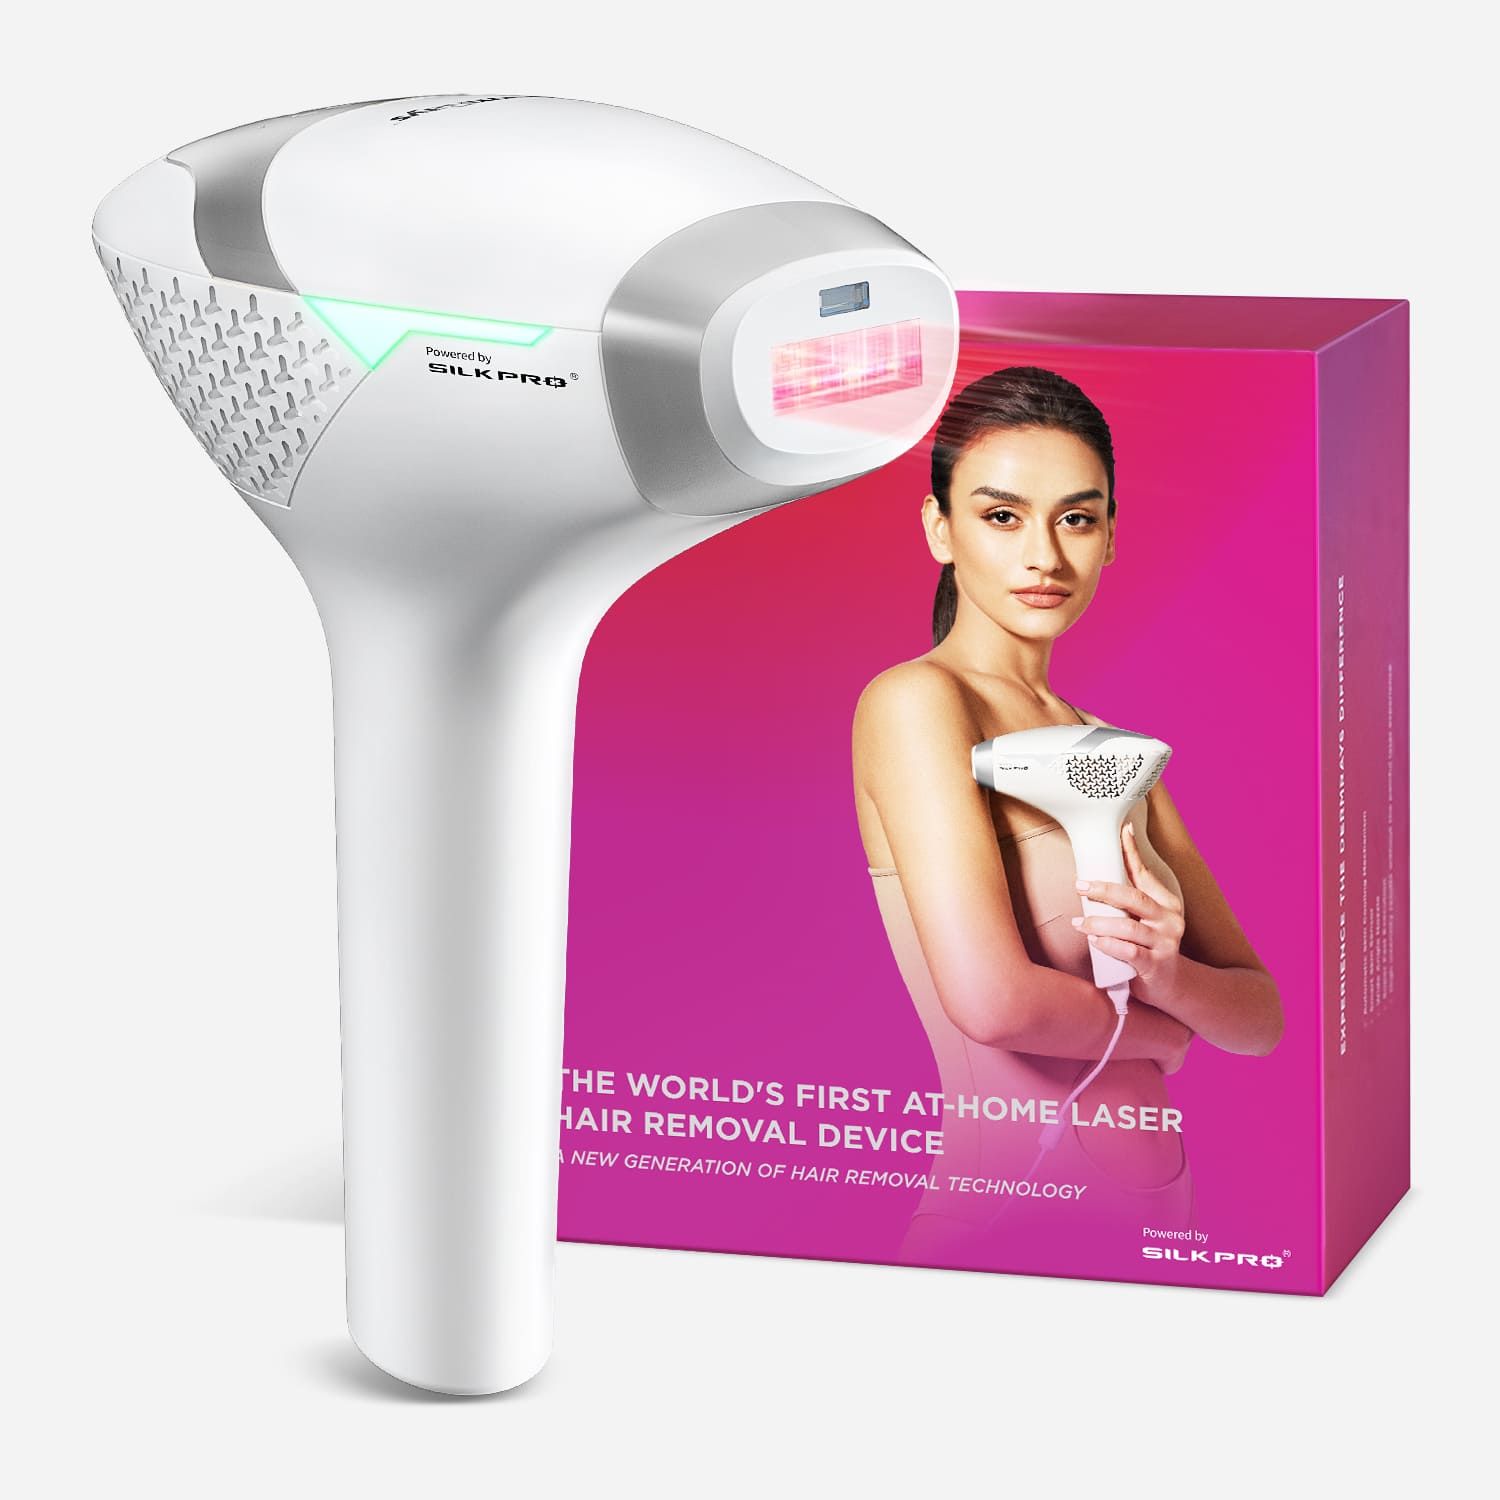 DermRays V8S Laser Hair Removal, Most Powerful up to 27J, for Both Men and Women